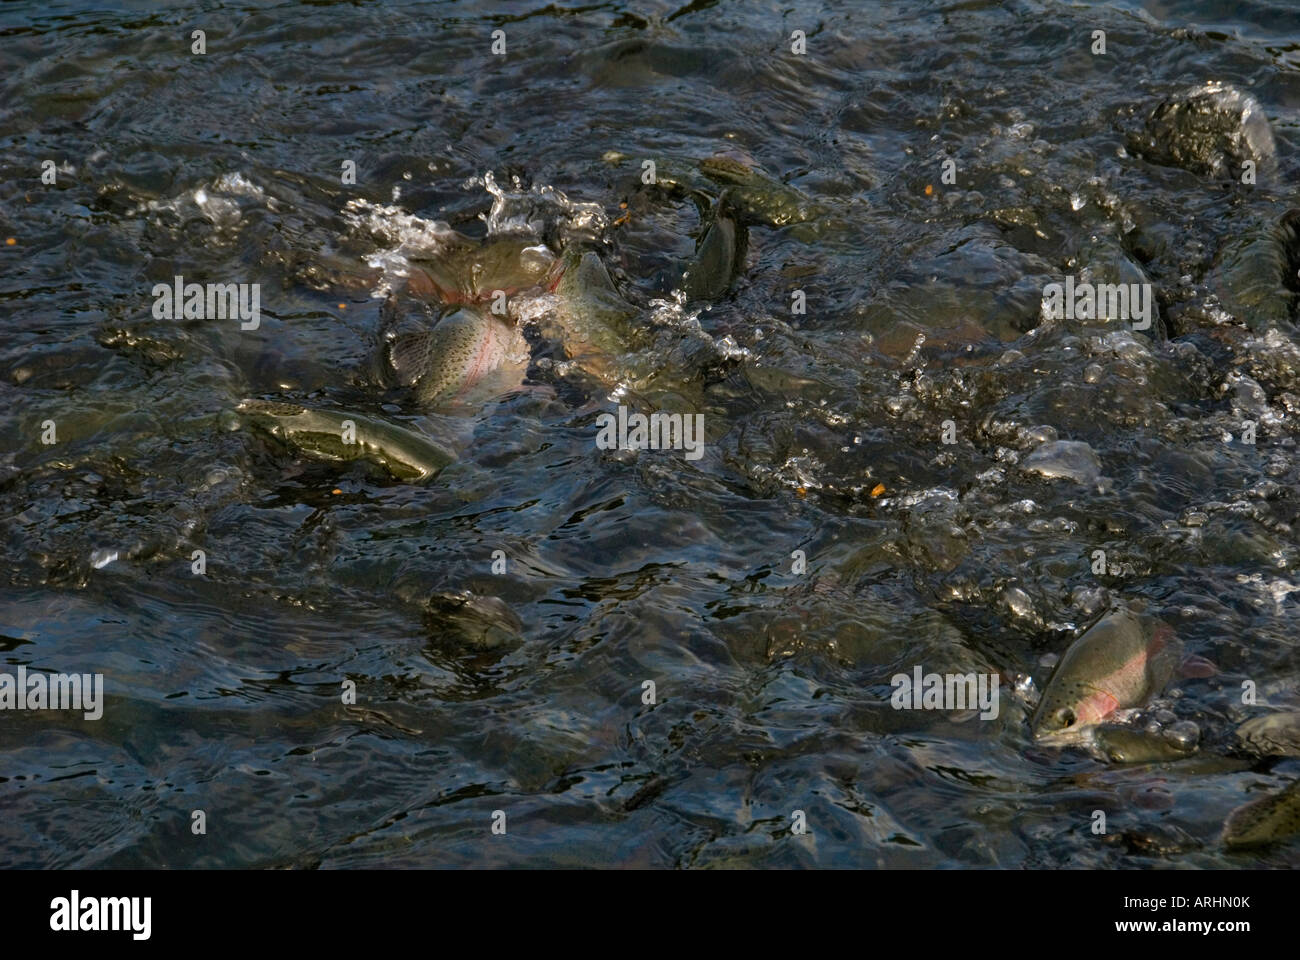 Feeding time at a Trout Farm Stock Photo